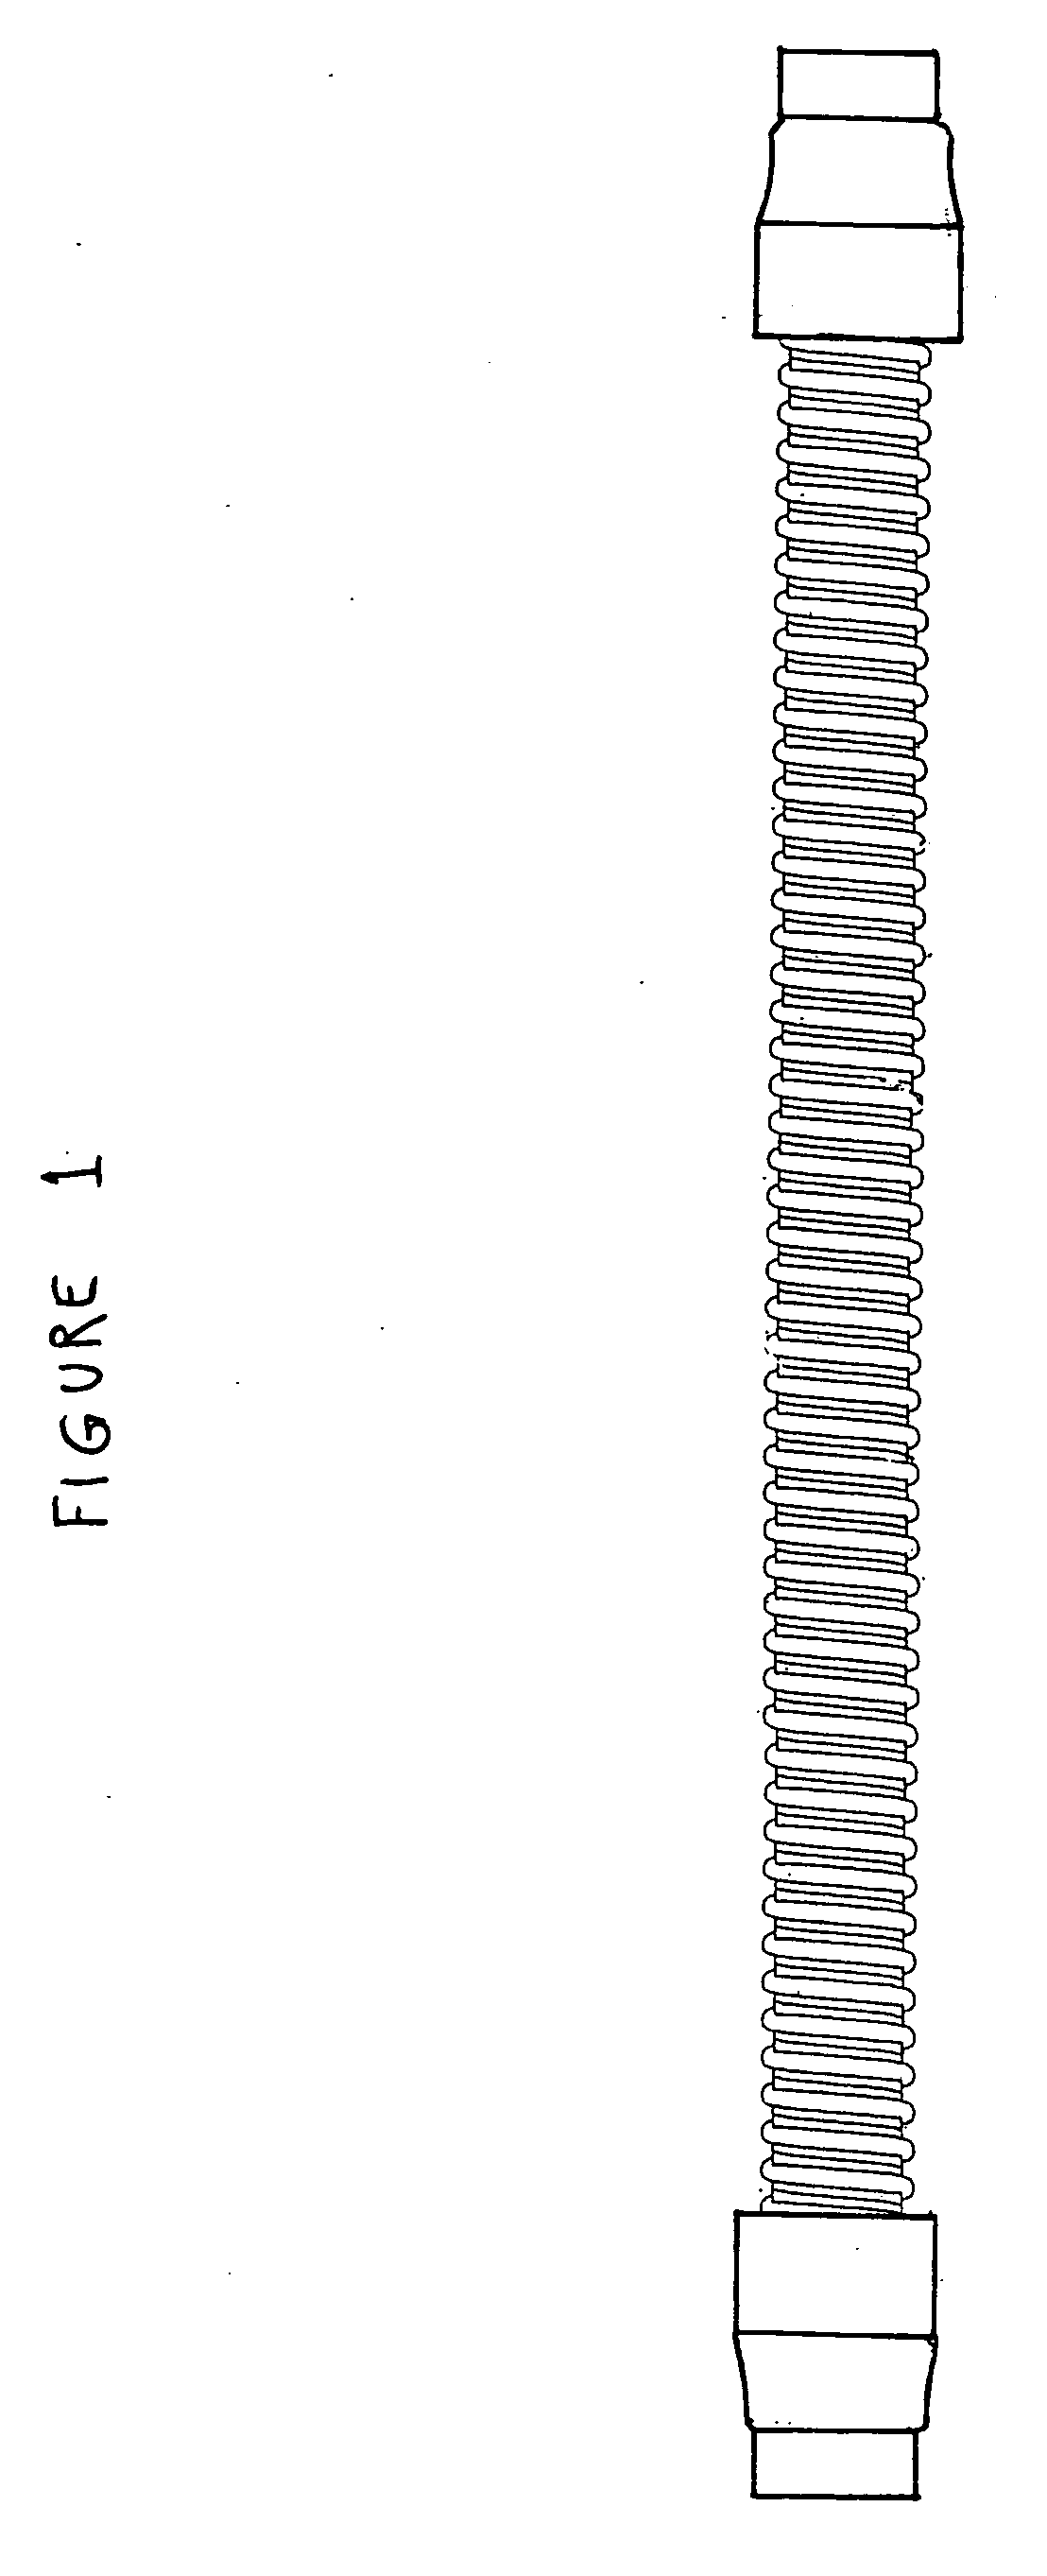 System for removal of water from a hose and the hygroscopic hose utilized